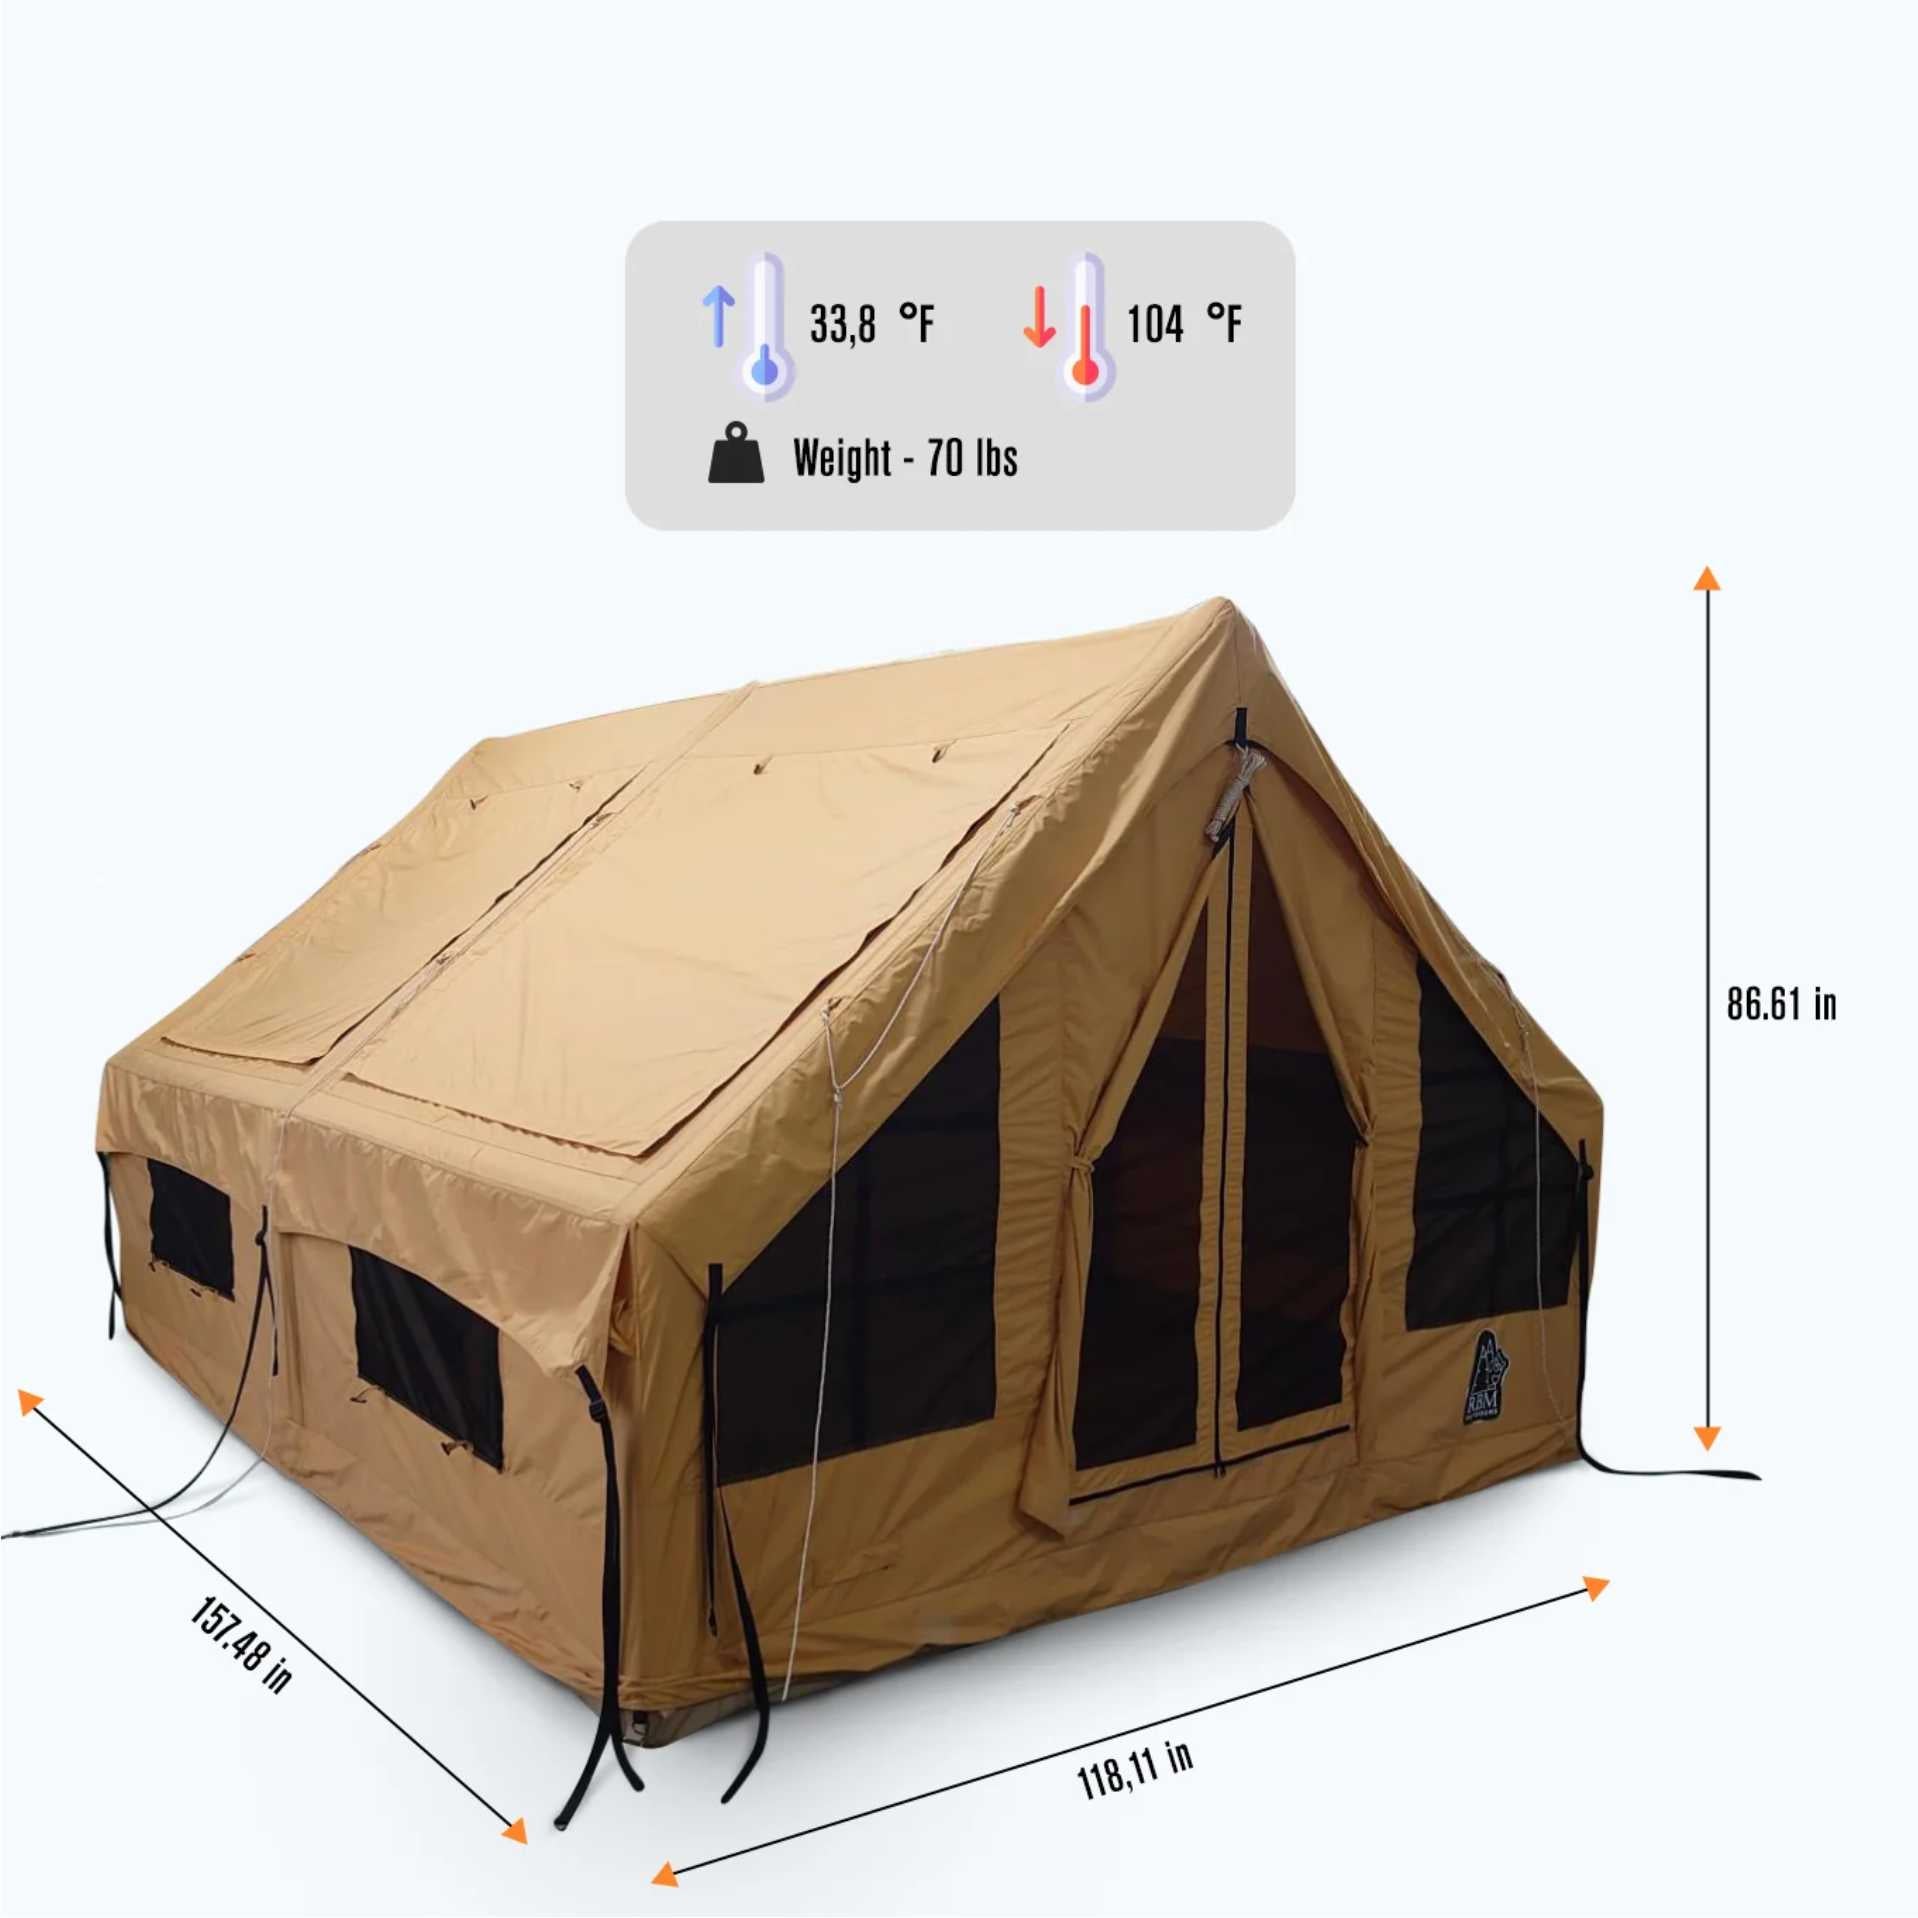 Inflatable Blow Up Tents House For Sale Inflatable House Tent For Adults